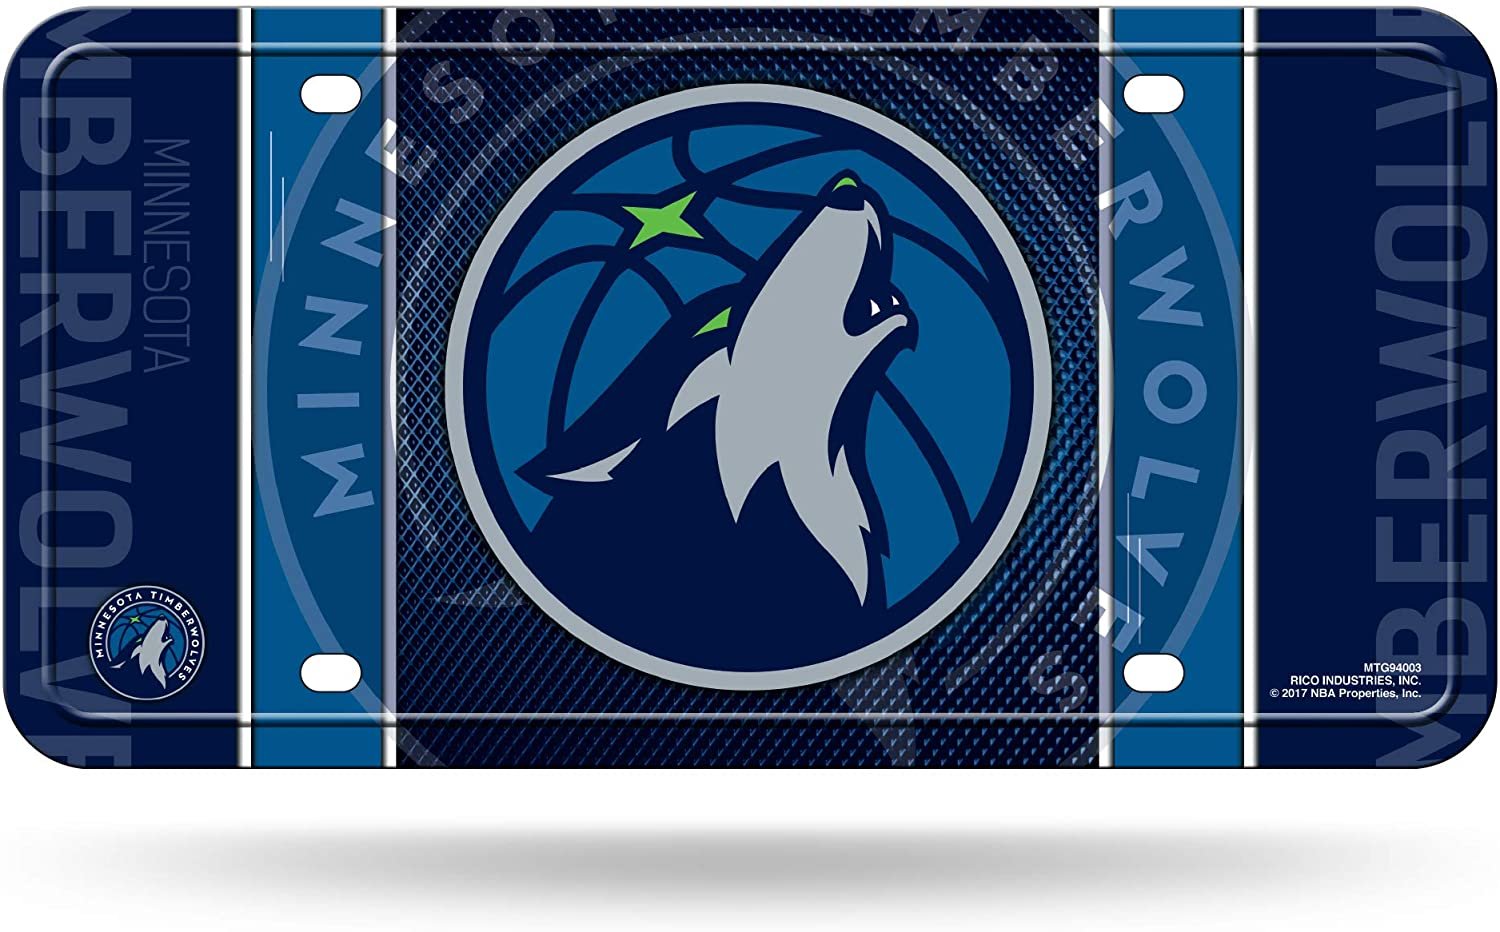 Minnesota Timberwolves Metal Auto Tag License Plate, Jersey Design, 6x12 Inch